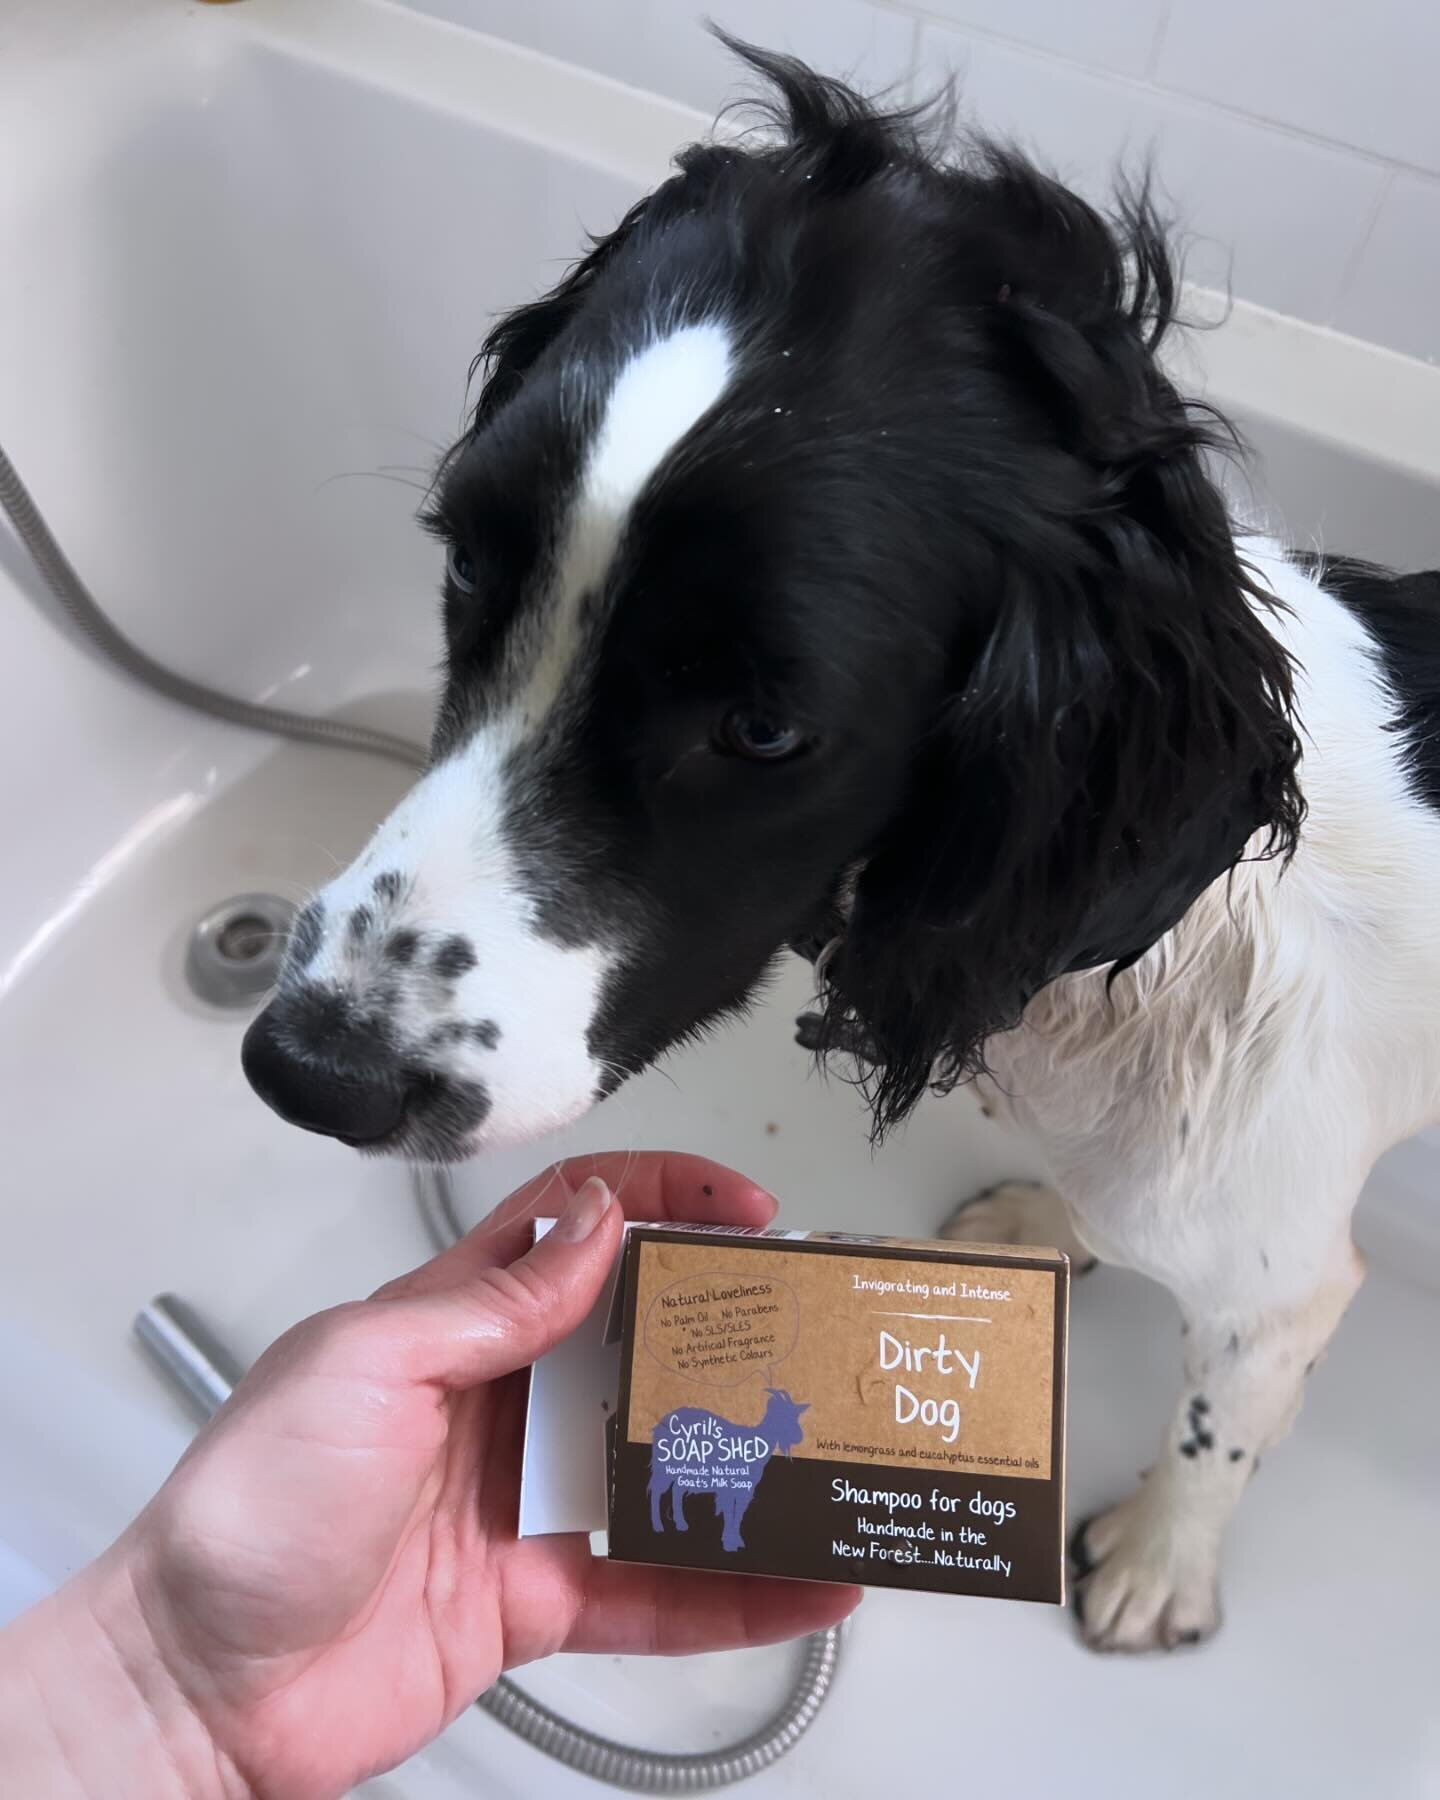 We stock all kinds of gifts and homeware including essentials like this natural goat soap for dogs as well as treats for our four legged family members. 

Pop in, we&rsquo;re open every day 10am-4pm near the main entrance to Bradgate Park in Newtown 